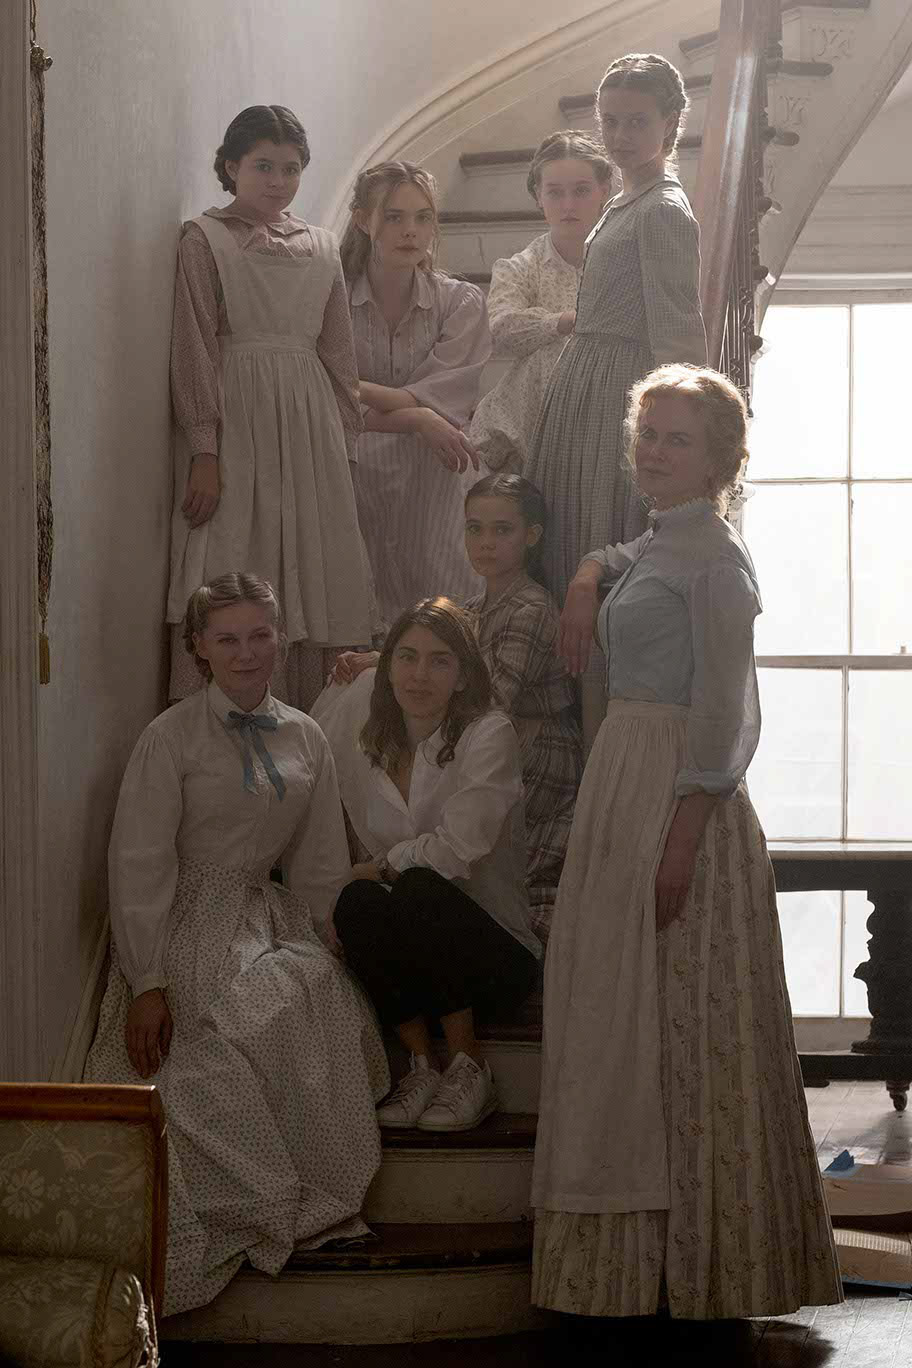 Sofia Coppola on set with the women and girls of The Beguiled cast